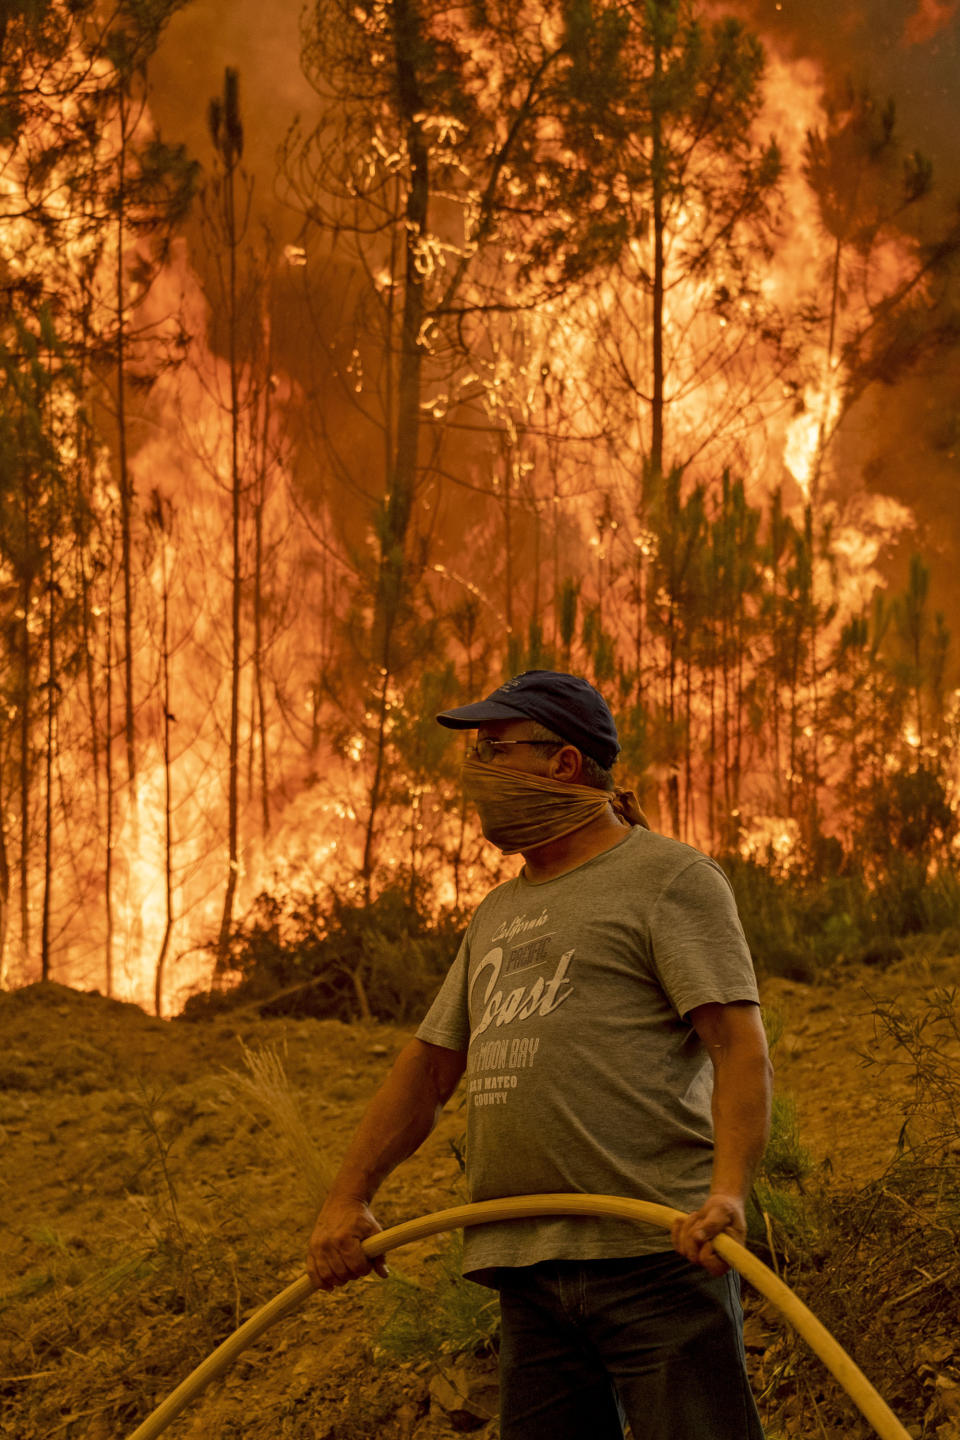 A villager tries to extinguish a wildfire at the village of Chaveira, near Macao, in central Portugal on Monday, July 22, 2019. More than 1,000 firefighters are battling a major wildfire amid scorching temperatures in Portugal, where forest blazes wreak destruction every summer. About 90% of the fire area in the Castelo Branco district, 200 kilometers (about 125 miles) northeast of the capital Lisbon, has been brought under control during cooler overnight temperatures, according to a local Civil Protection Agency commander. (AP Photo/Sergio Azenha)